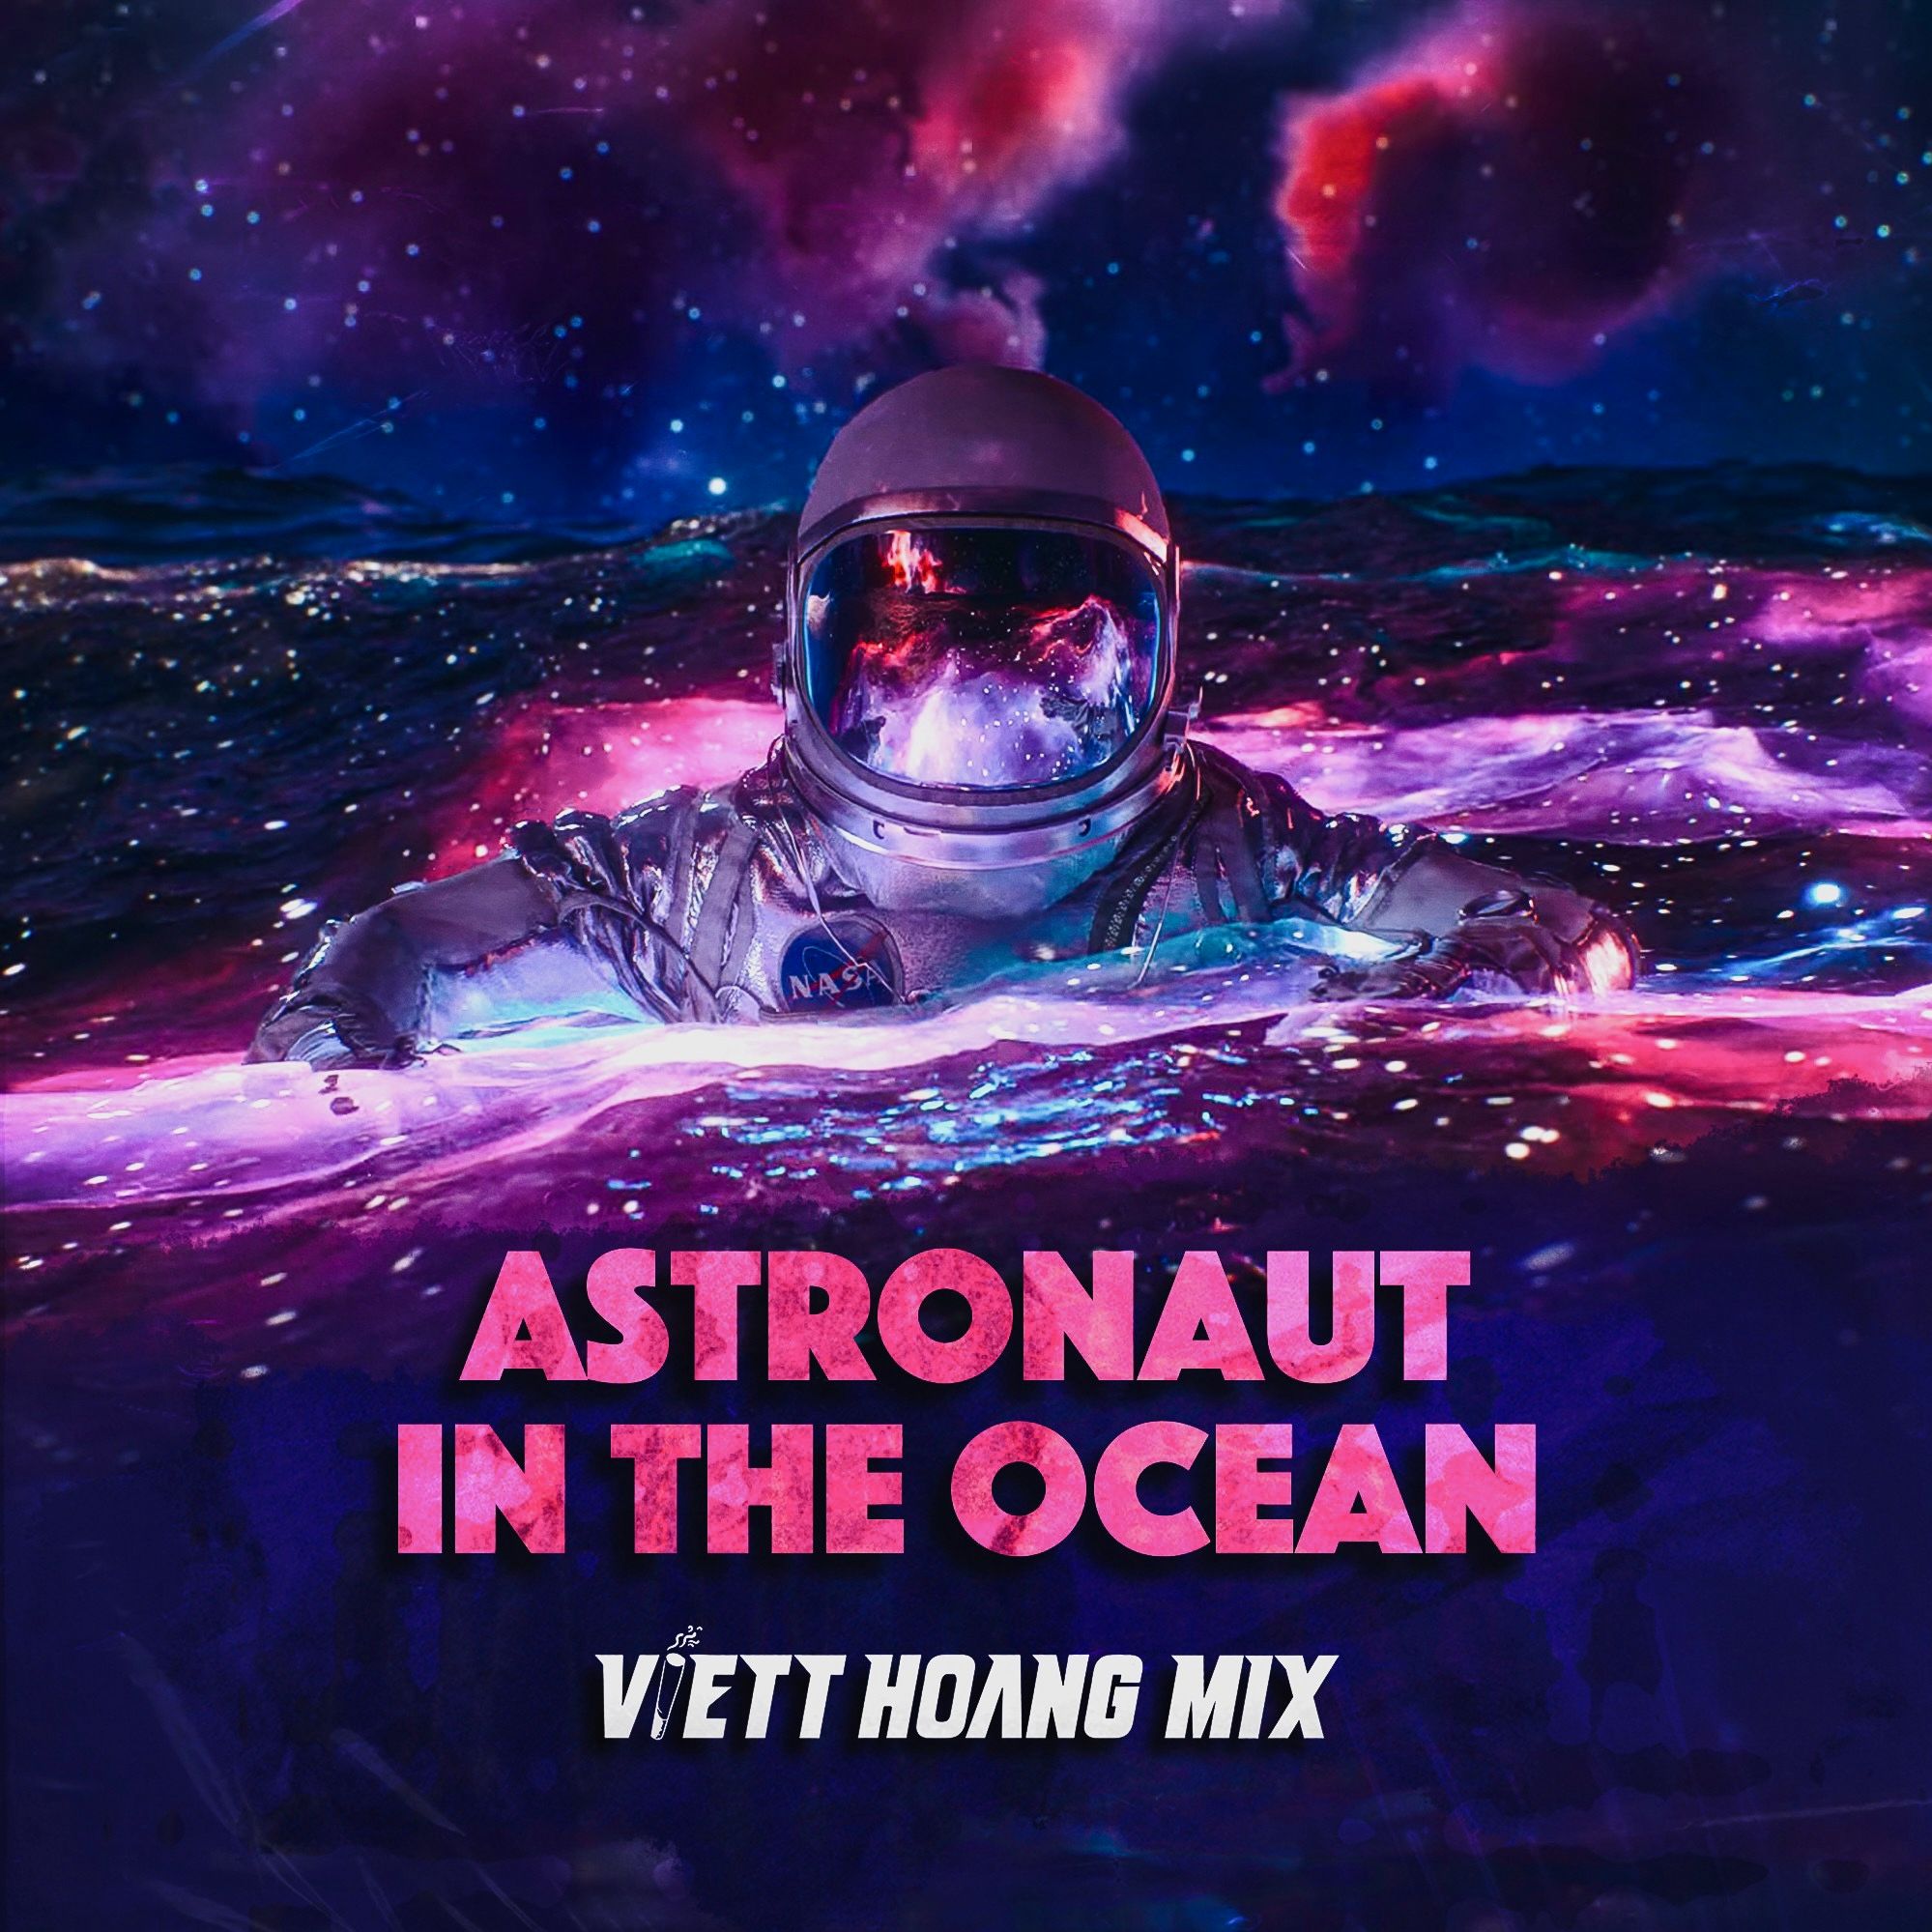 Daxistin MASKED WOLF - Astronaut in the Ocean - VIETTHOANG MIX